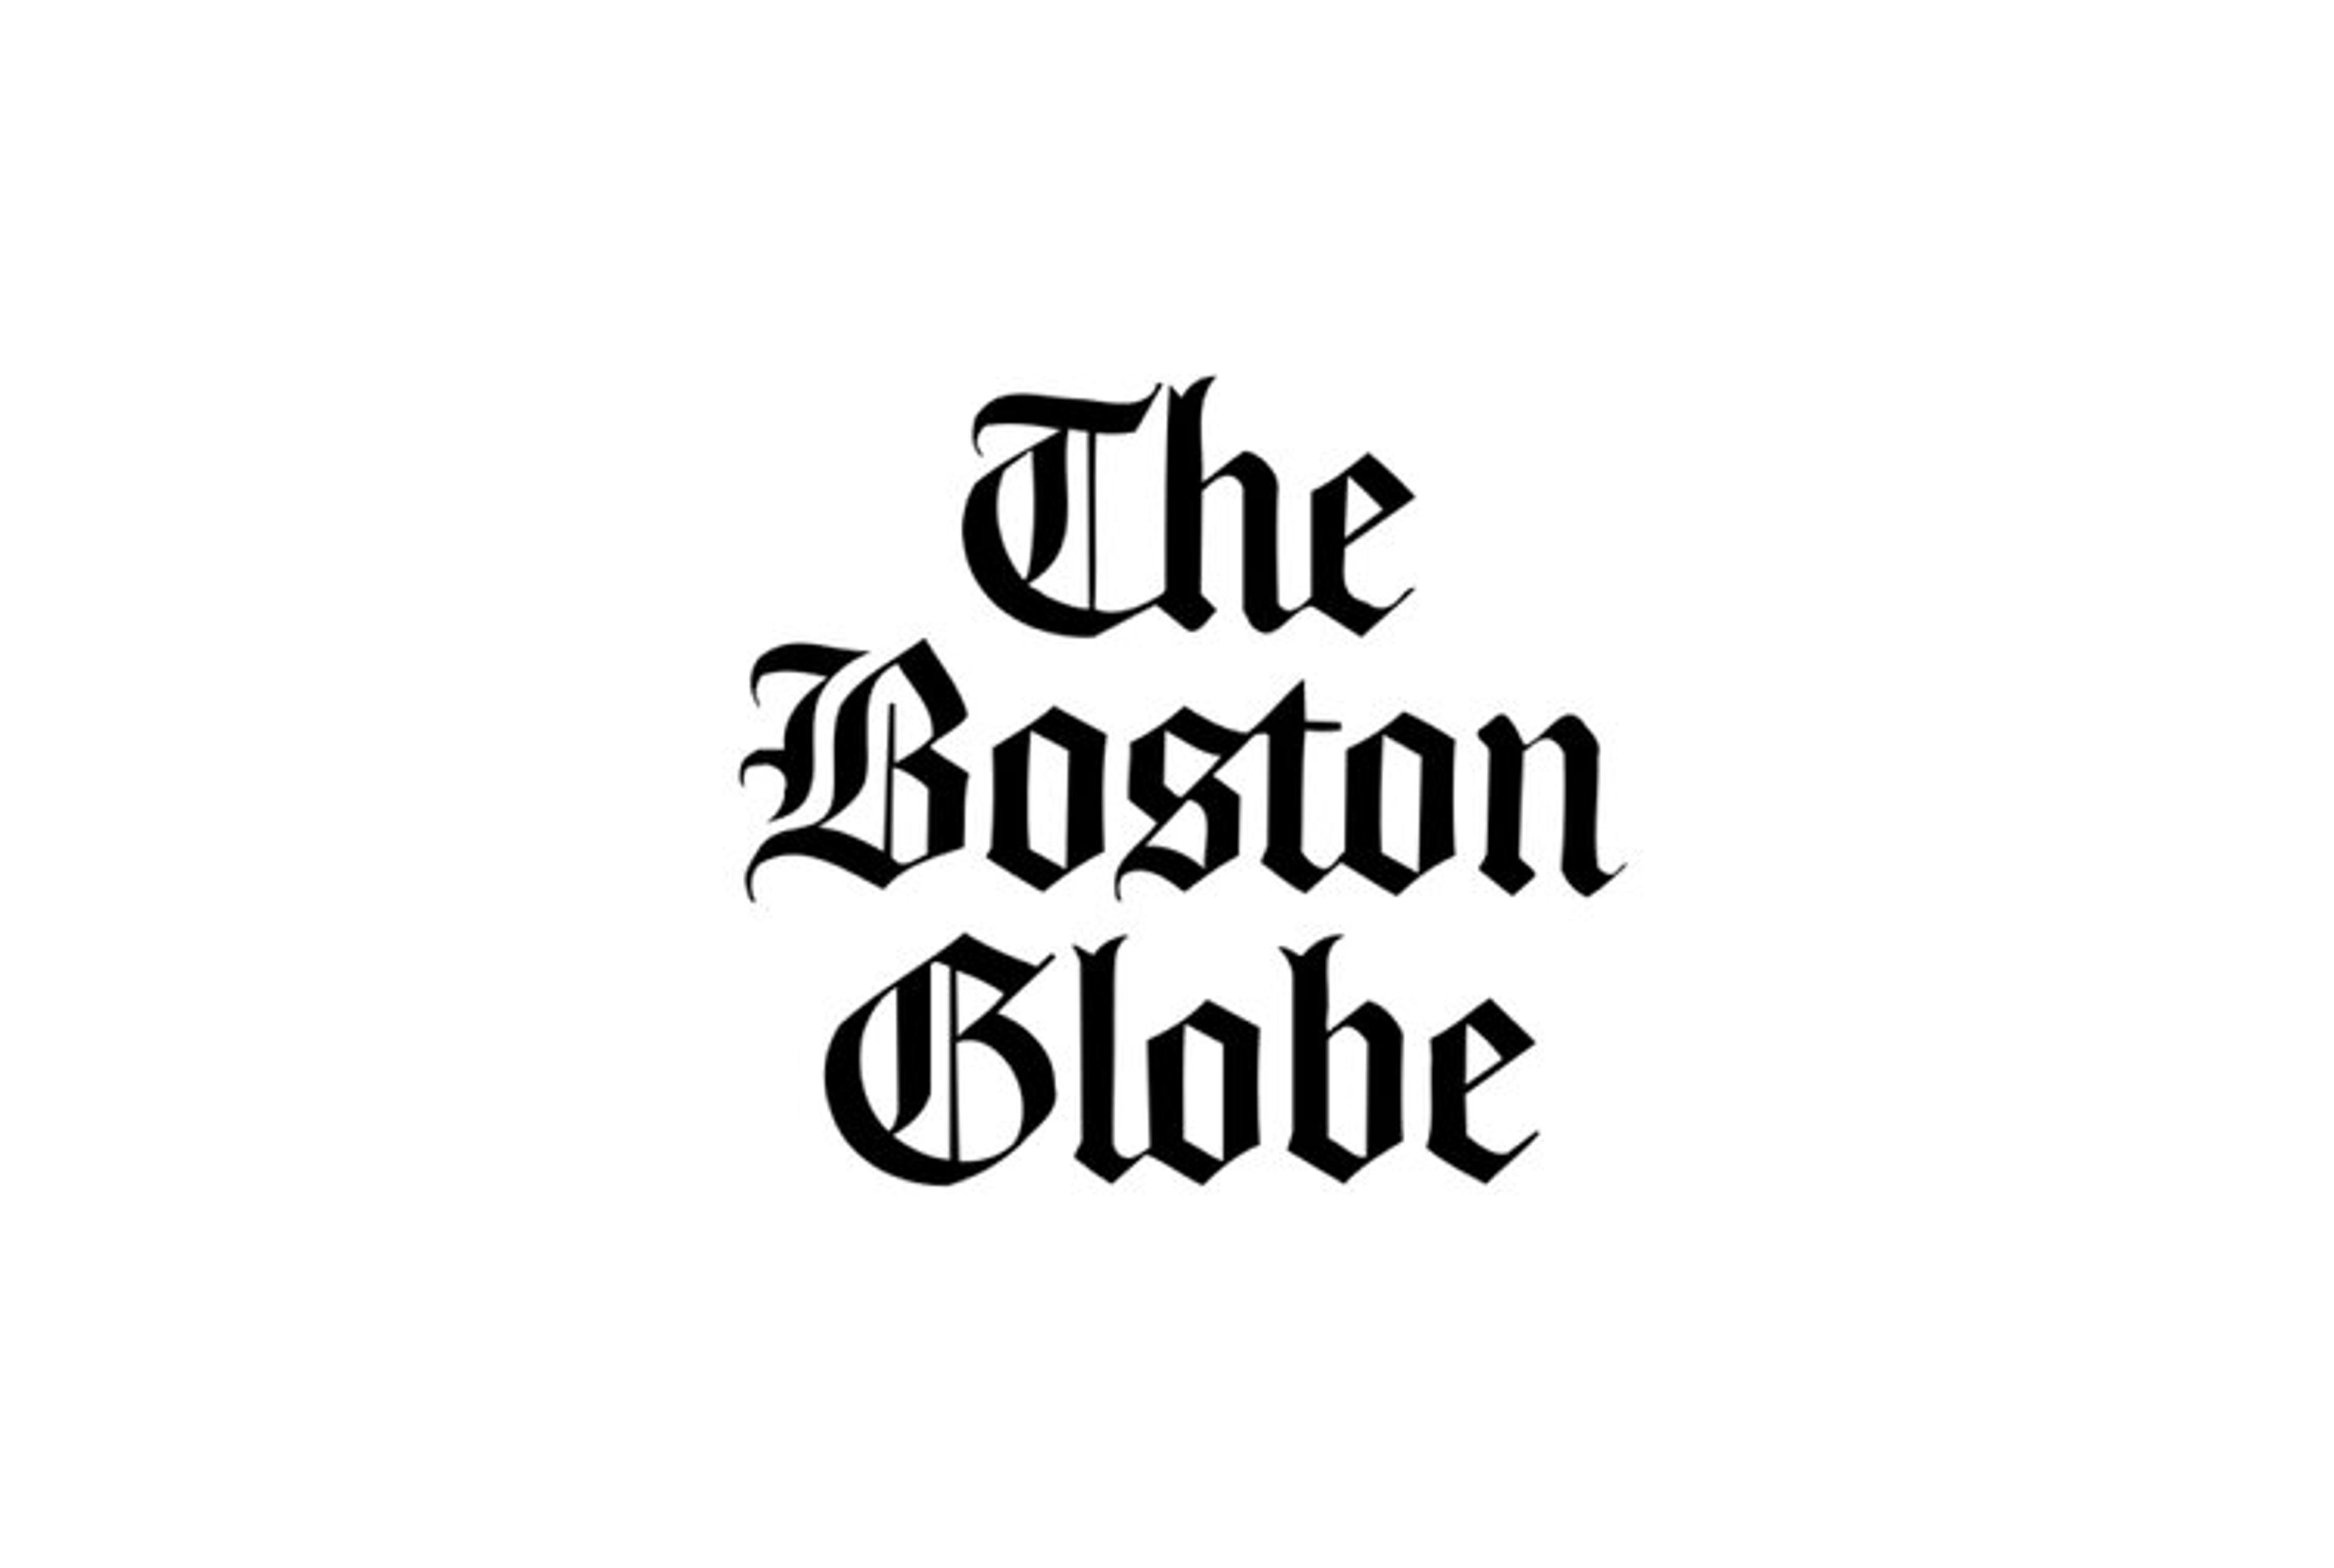 An Out-of-this-world Adventure (The Boston Globe)